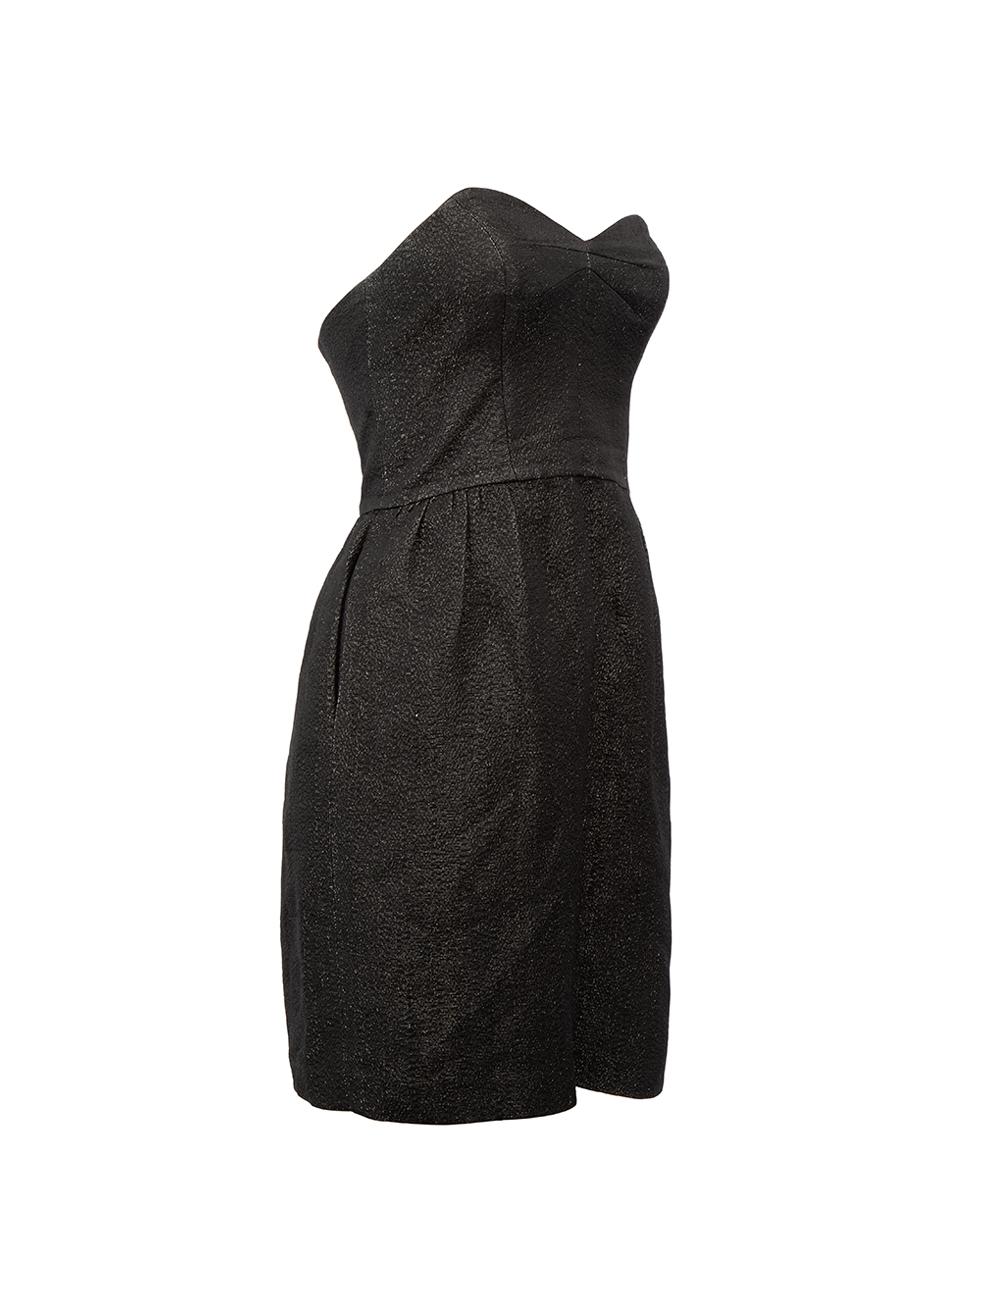 CONDITION is Good. Minor wear to dress is evident. Light wear to both underarms and the lining with discoloured marks on this used Milly designer resale item.



Details


Black

Synthetic

Mini strapless dress

Glitter threading

2x Front side